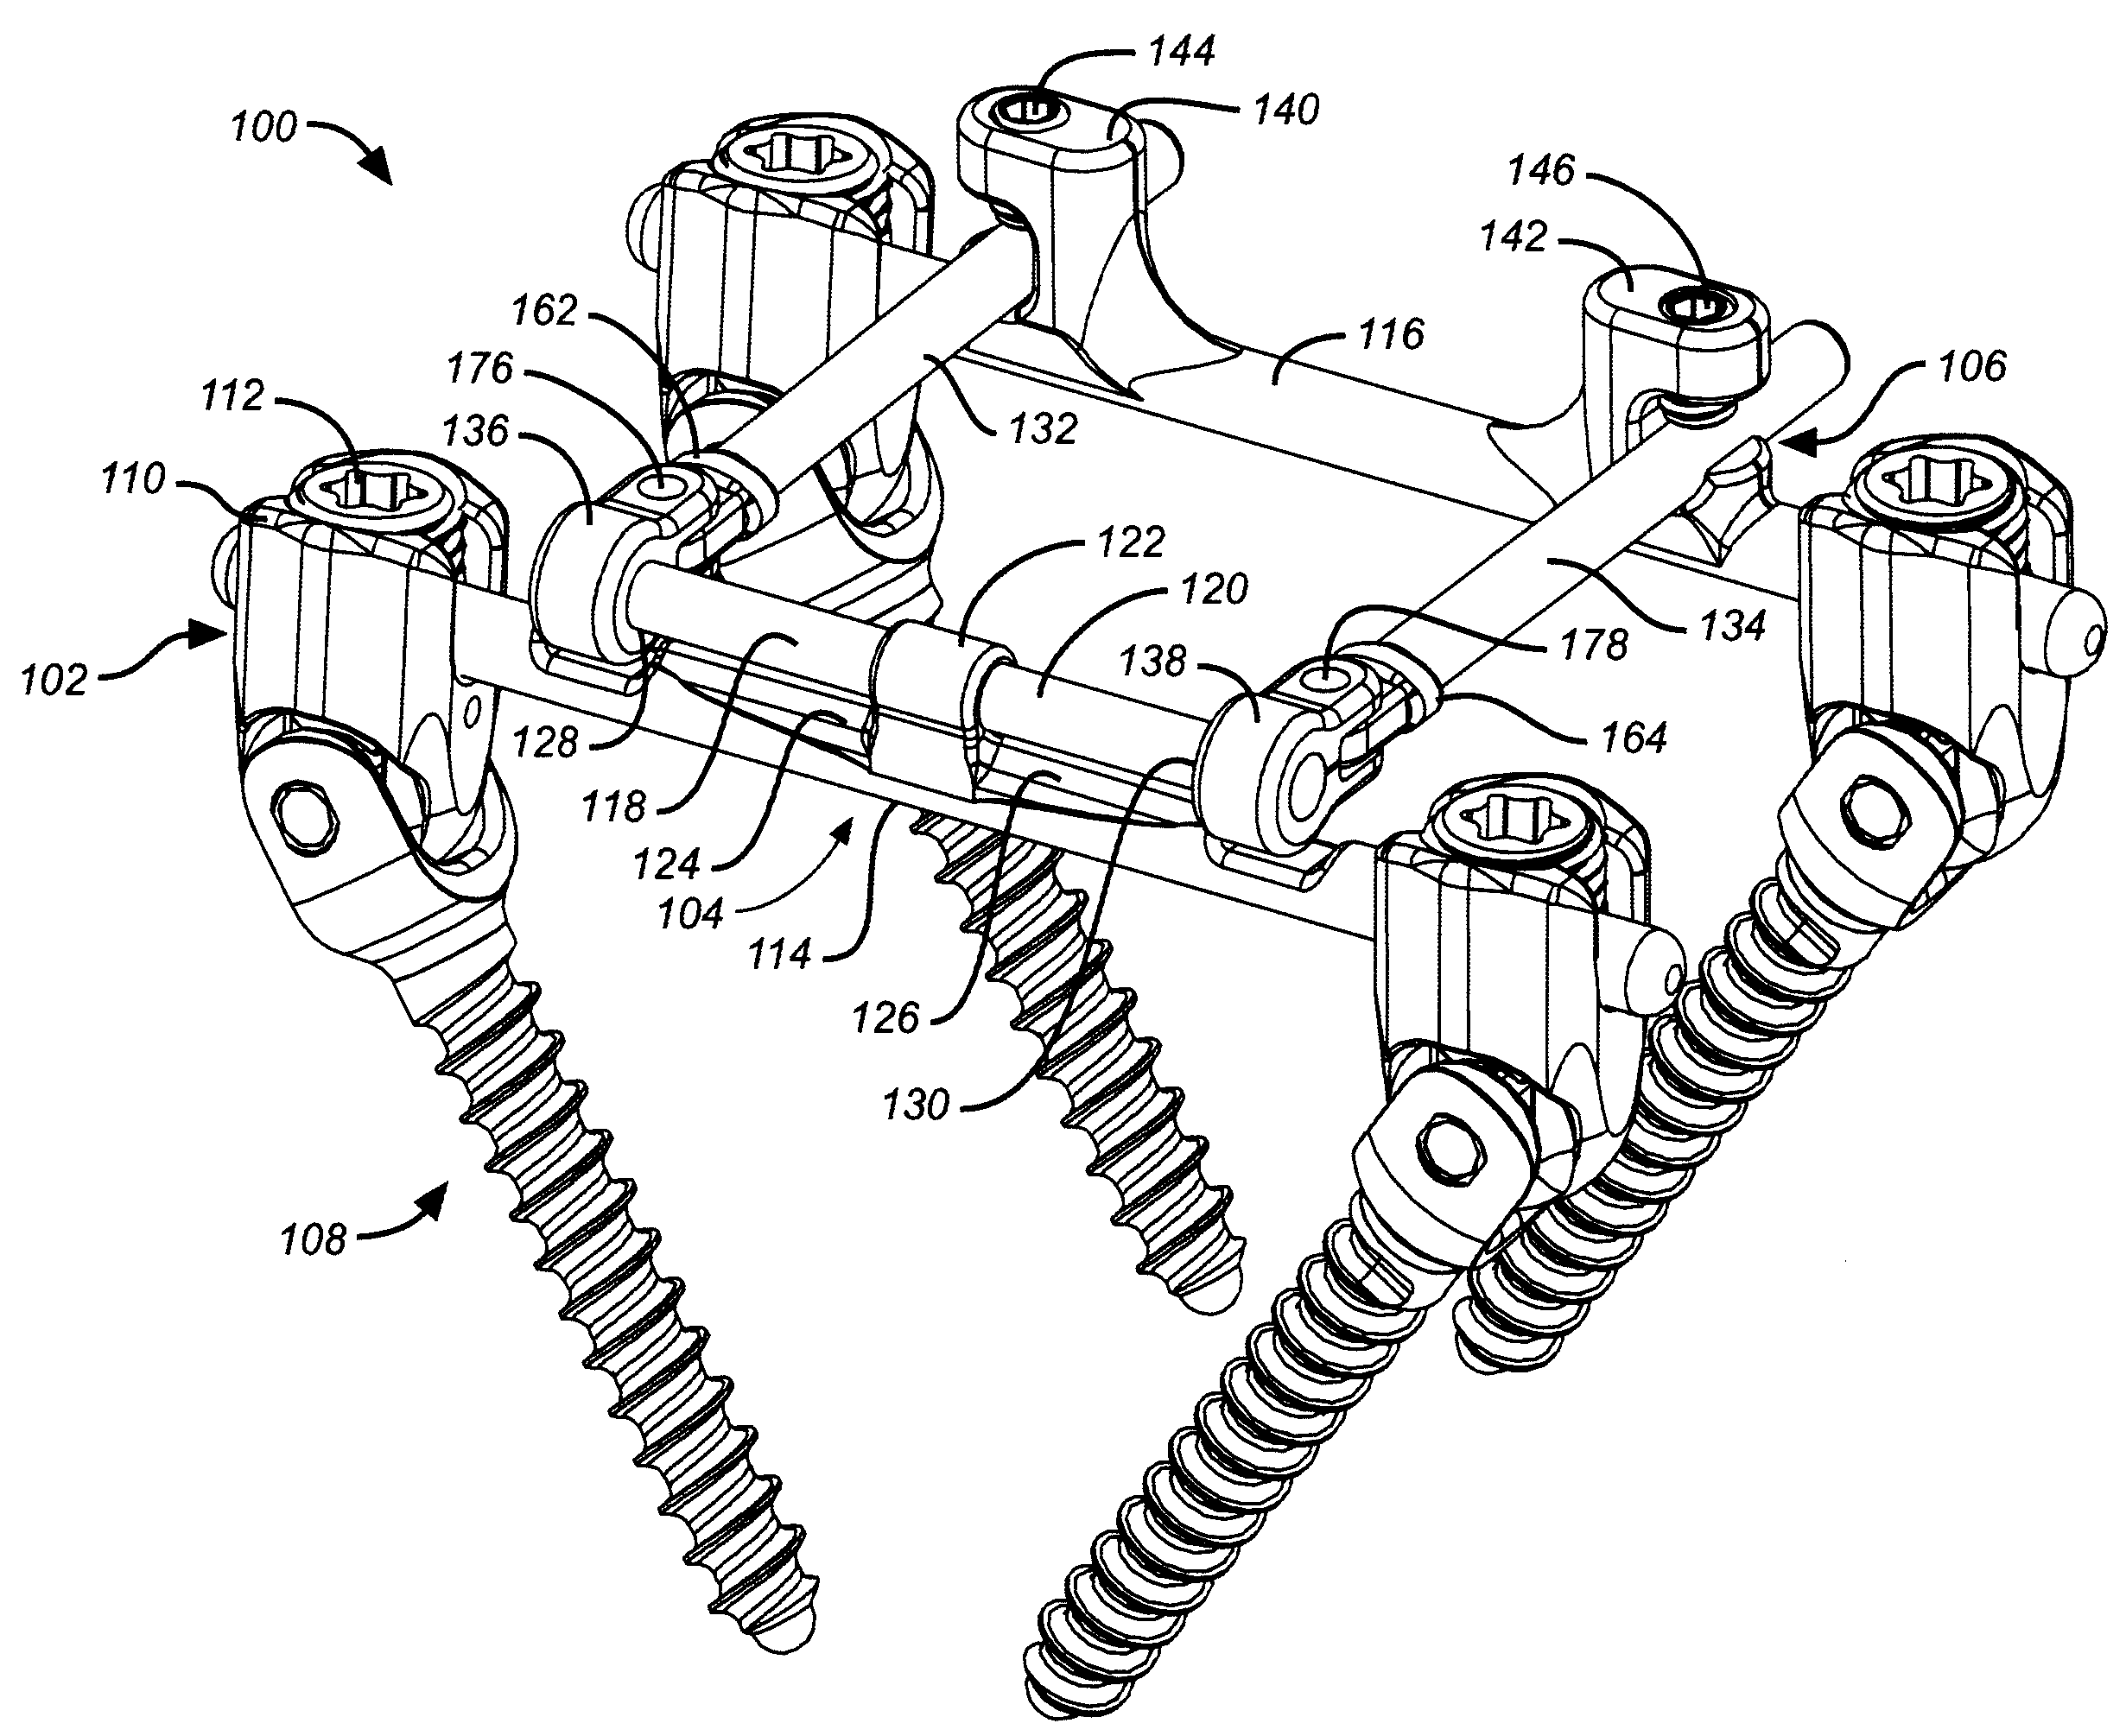 Shaped horizontal rod for dynamic stabilization and motion preservation spinal implantation system and method